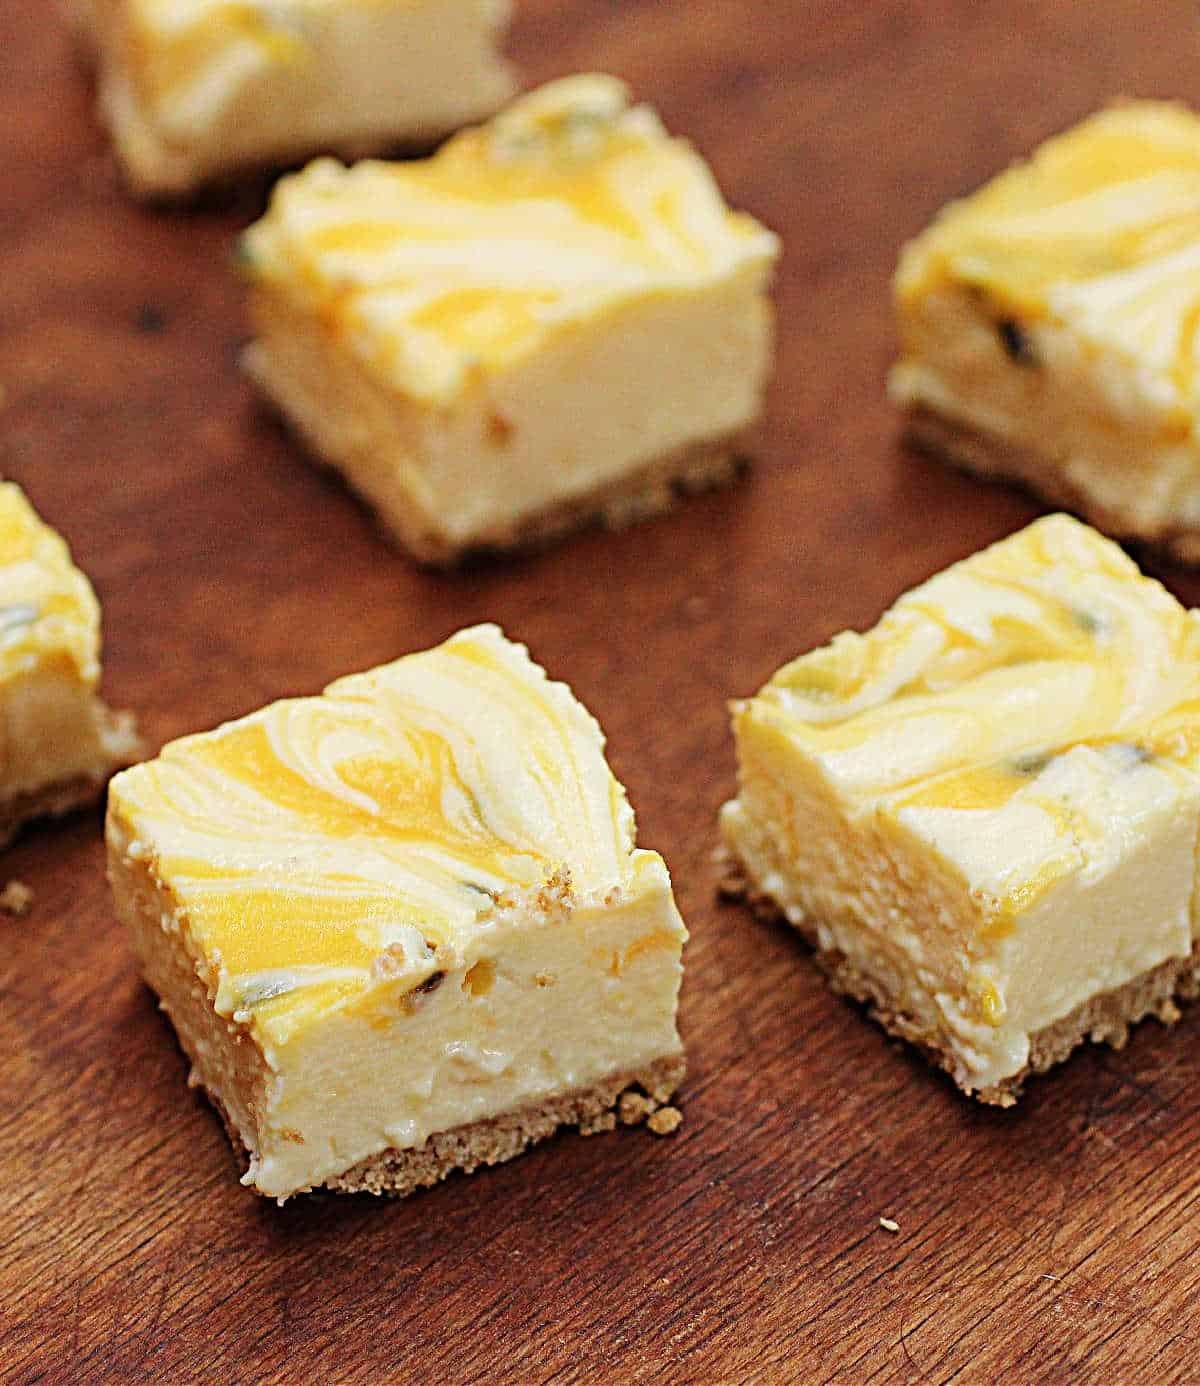 Squares of Passion fruit lemon no-bake cheesecake on wooden table